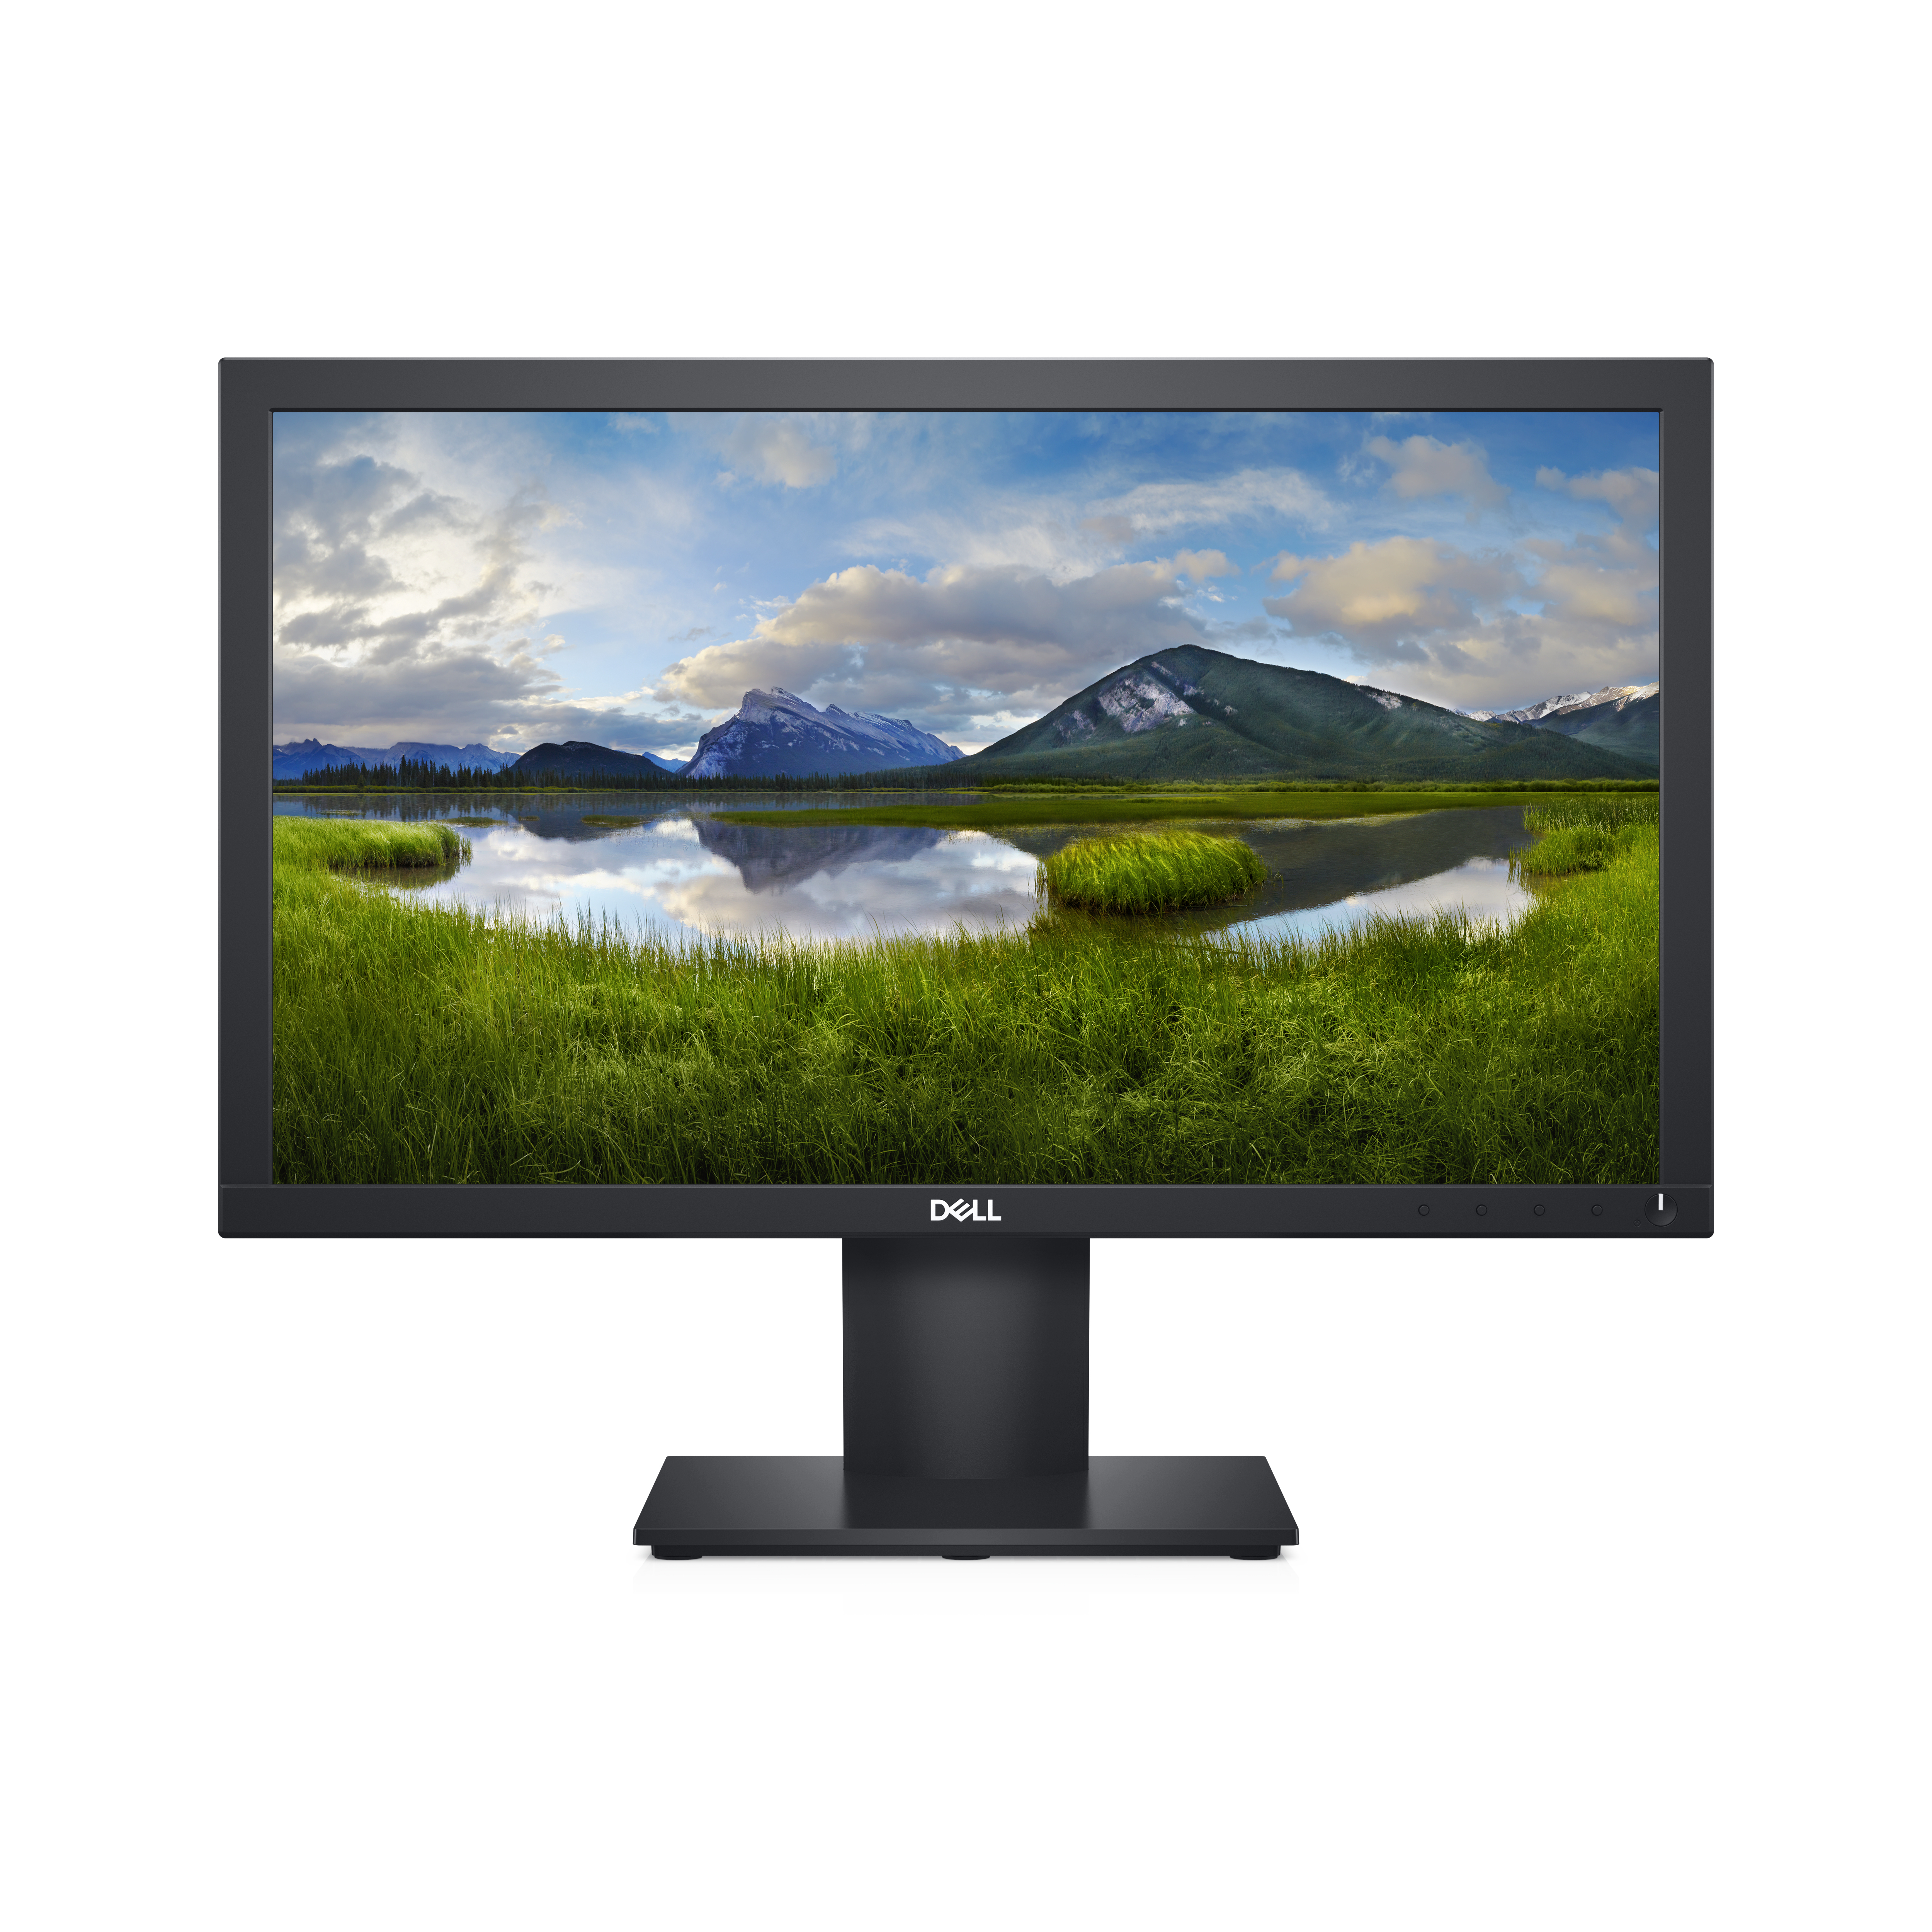 Monitor Dell E2020H 19.5 Led 1600X900 Vga/Dp 3Wty Cable Startech Dp